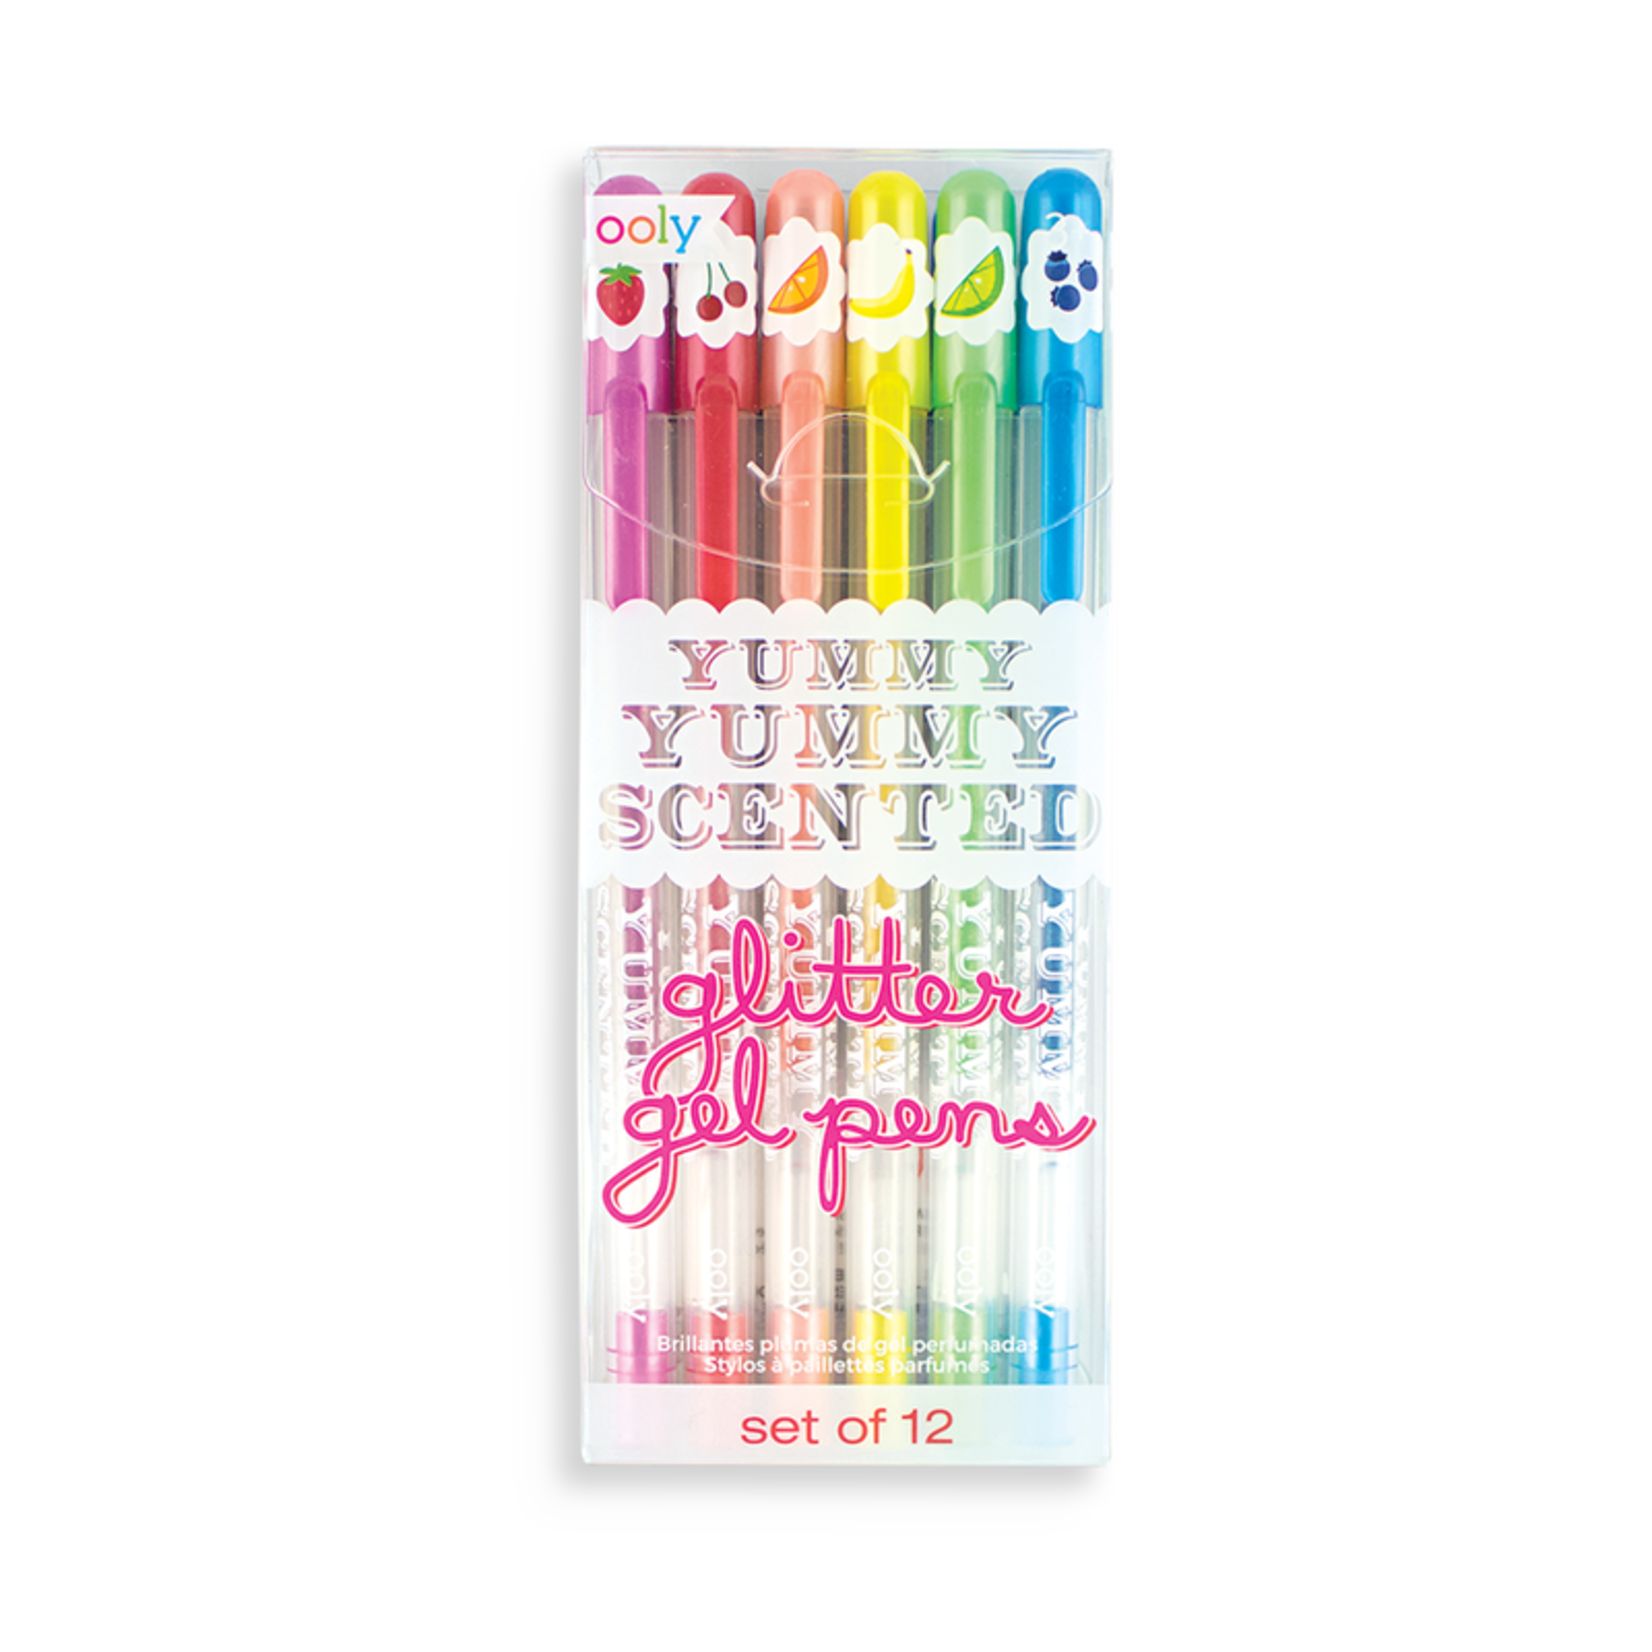 OOLY OOLY - Yummy Yummy Scented Glitter Gel Pens